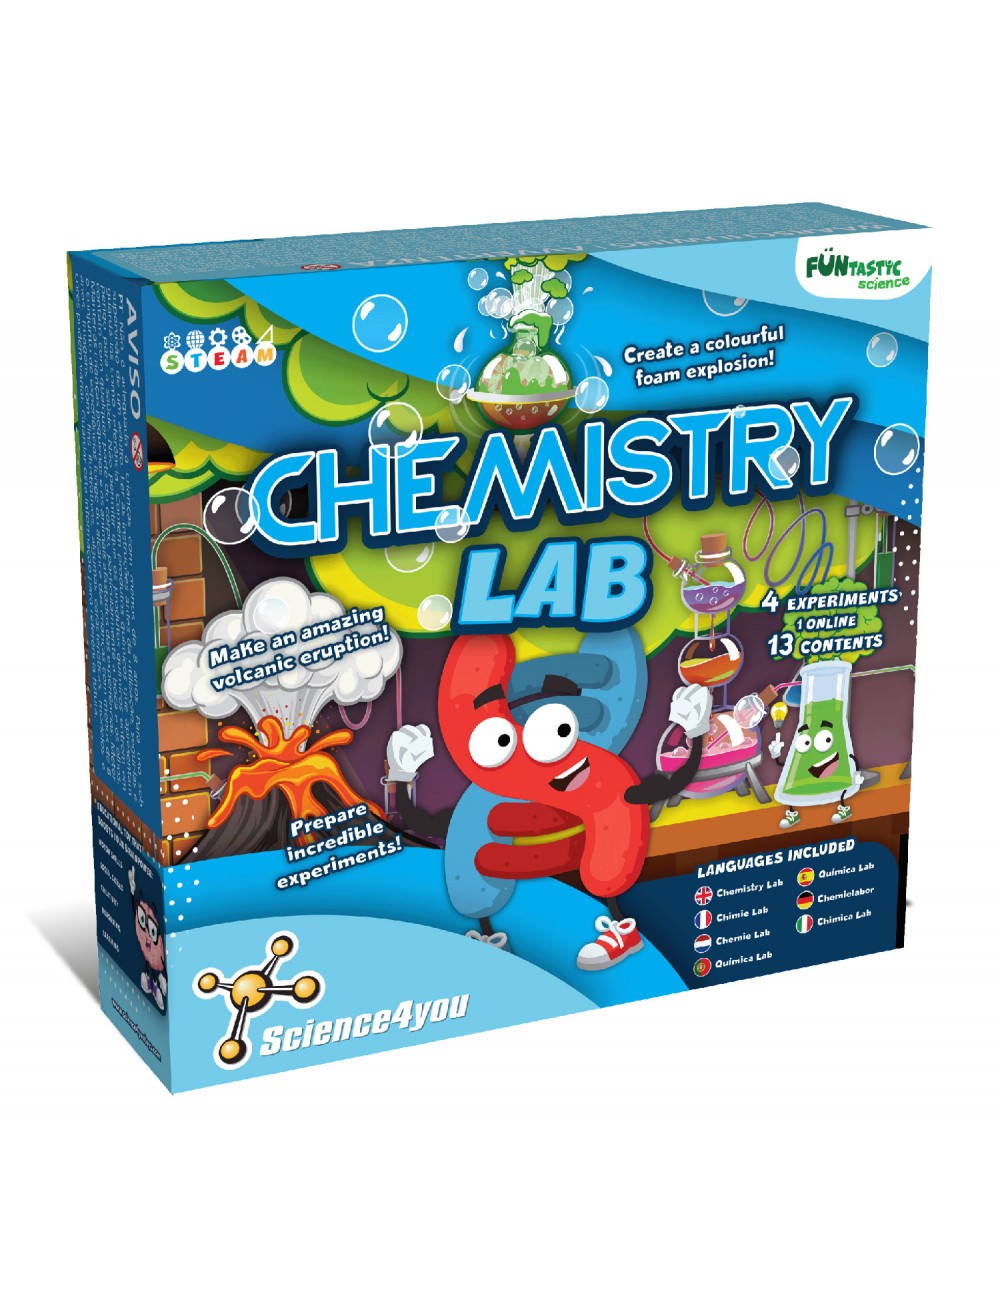 Children's Chemistry Science Experiment Kit Pretend Play Science